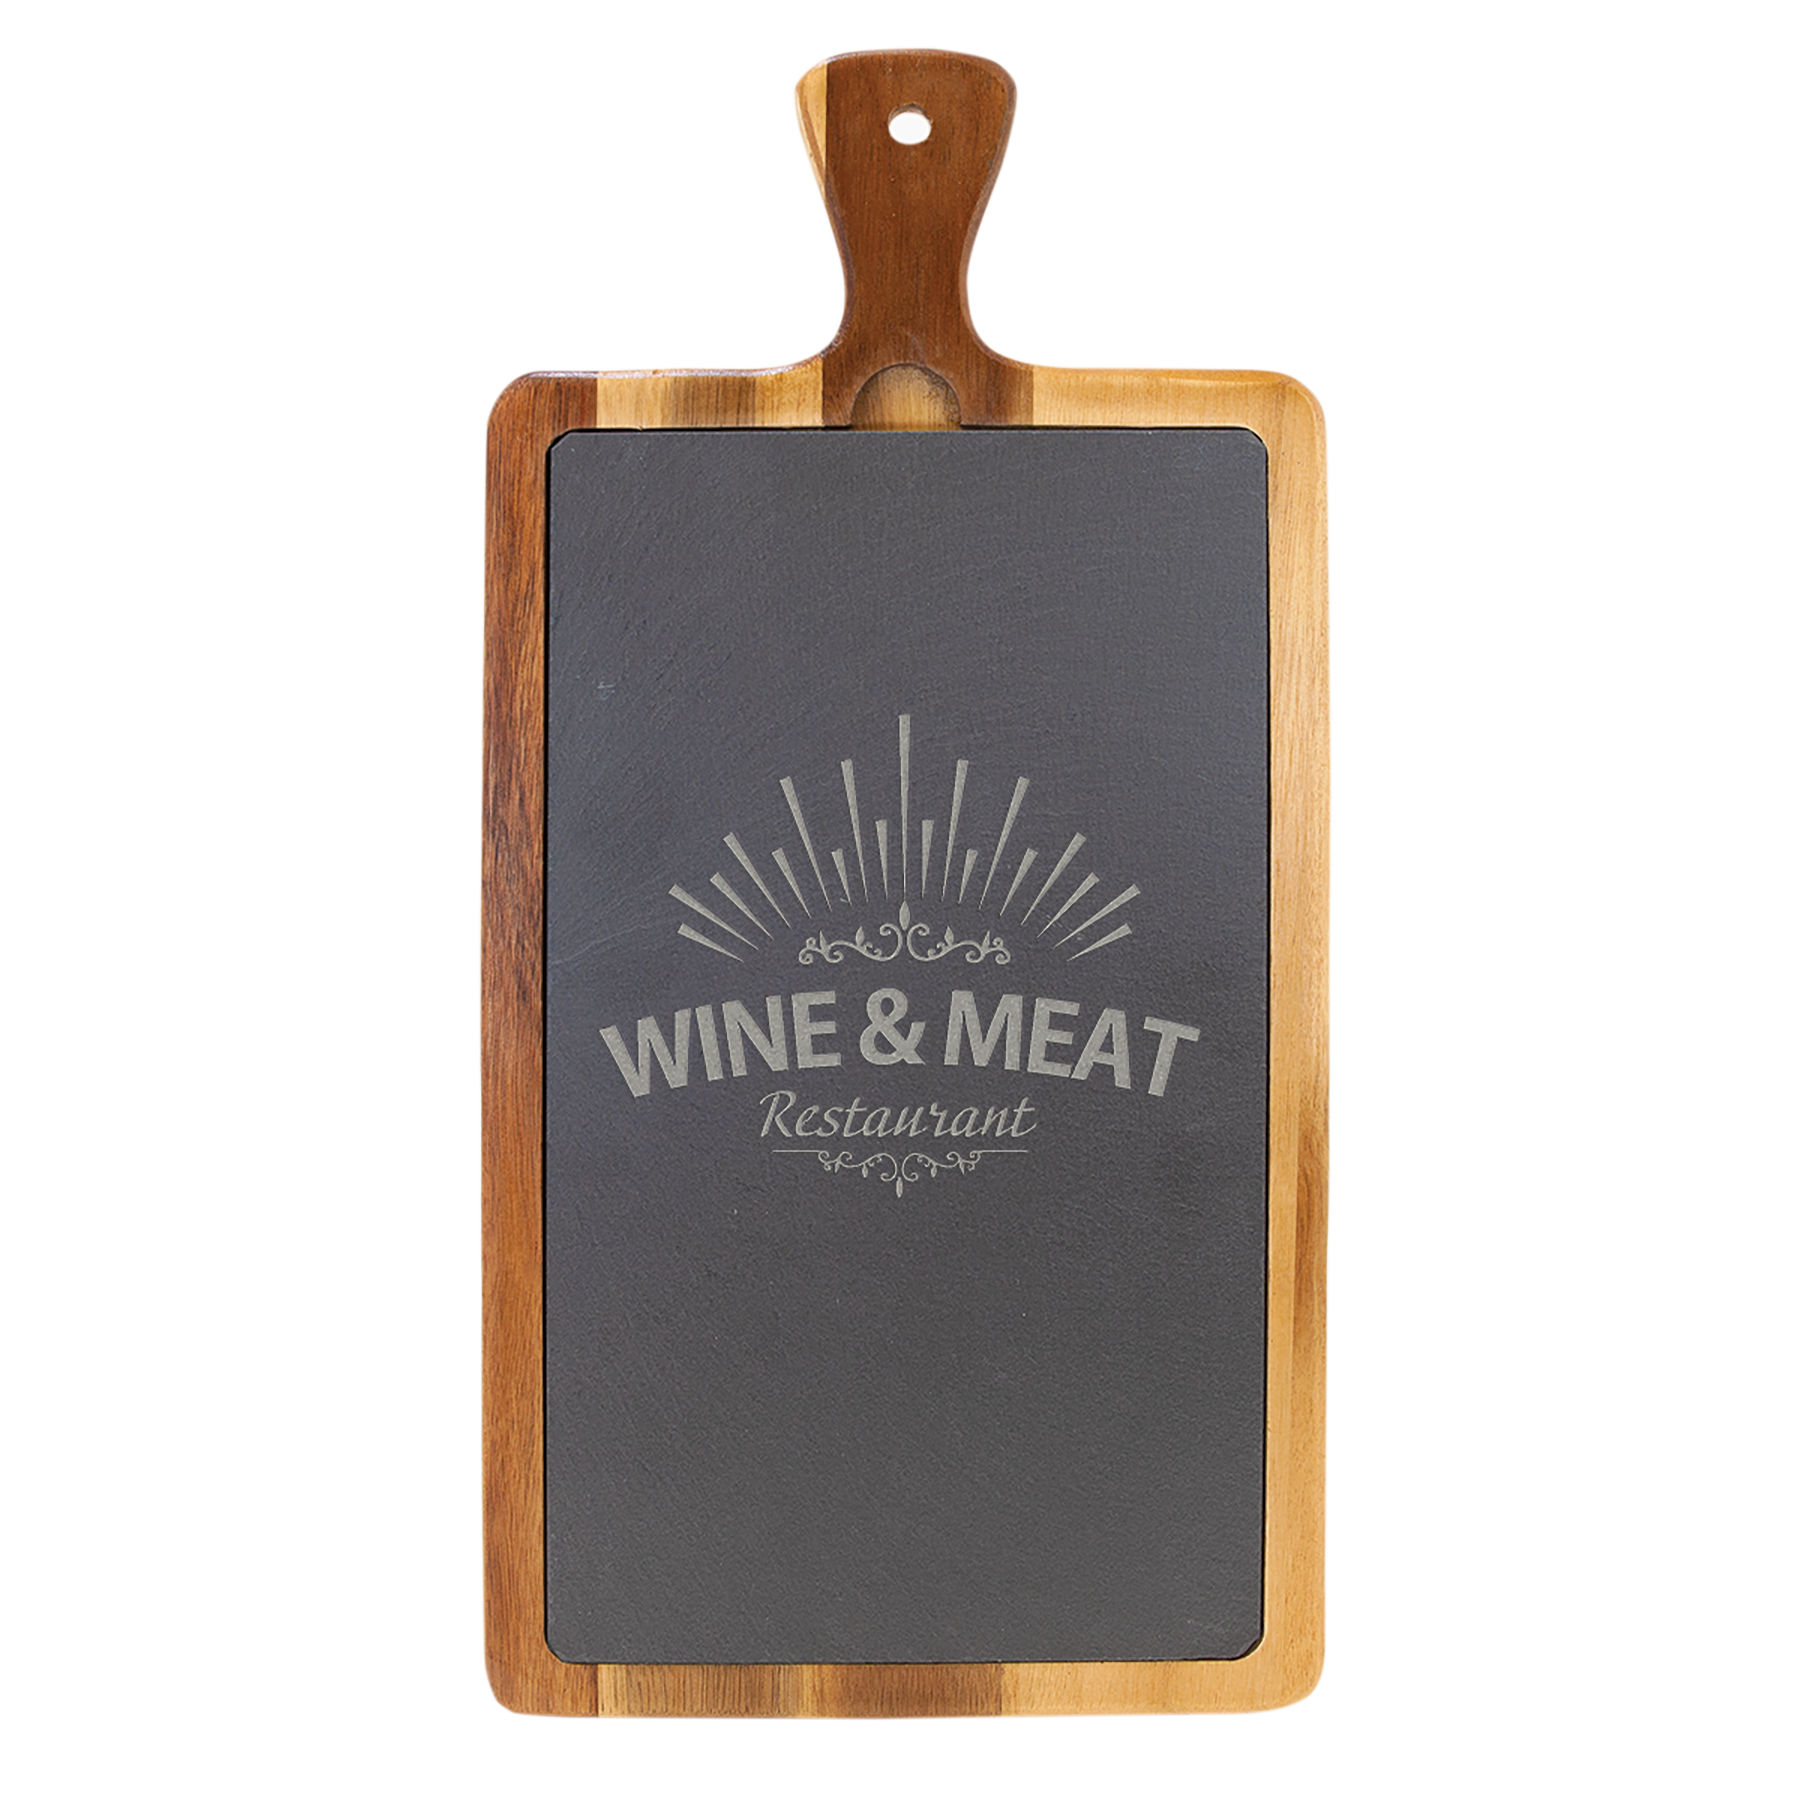 Customize this 16" x 7 3/4" Acacia Wood/Slate Cutting Board with your company logo or personal saying.